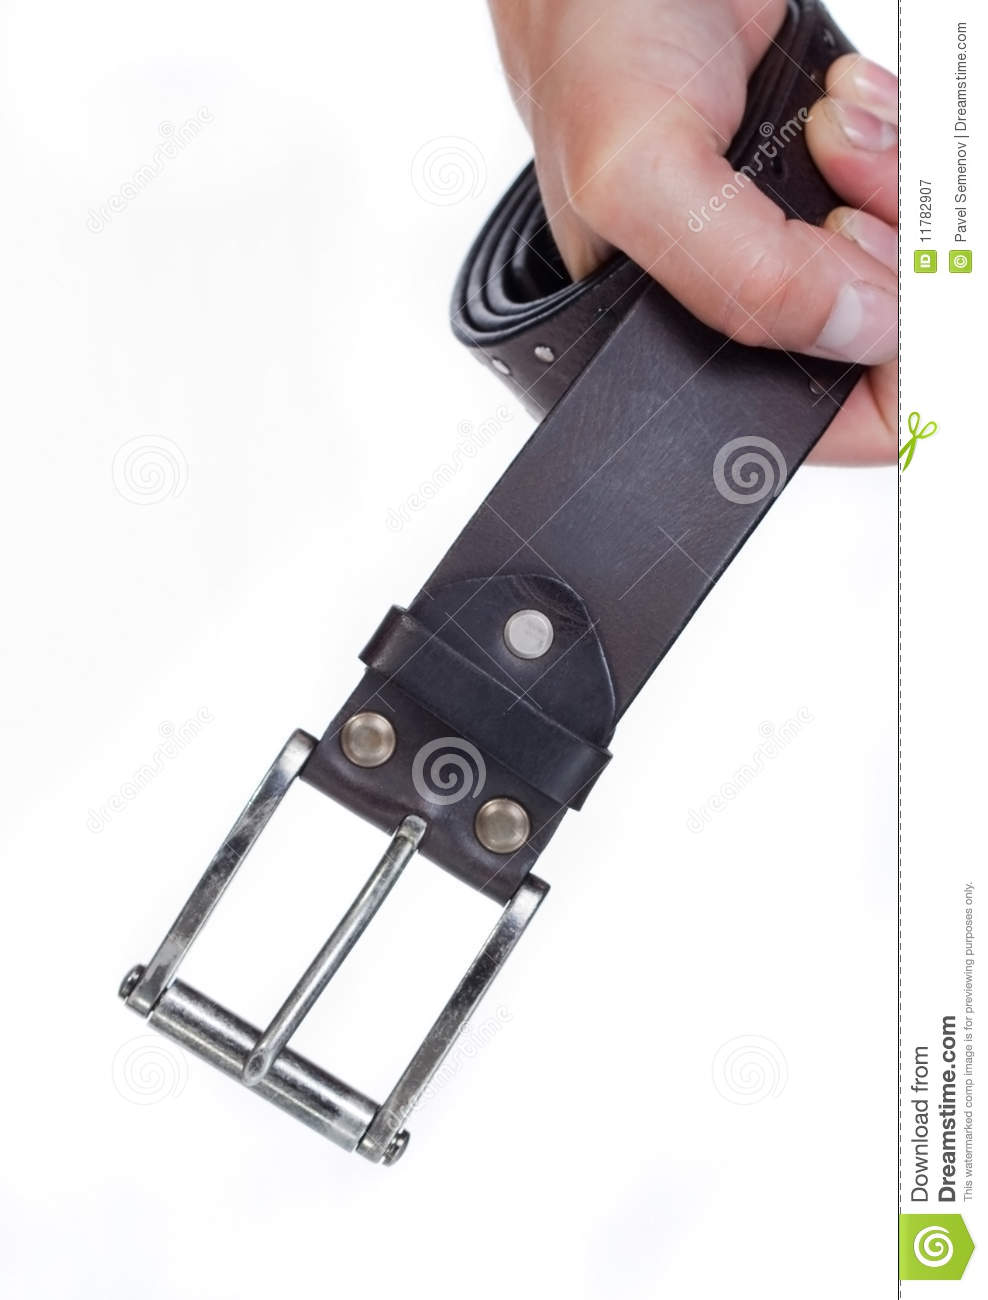 Man S Hand Holding A Strap Royalty Free Stock Photography   Image    